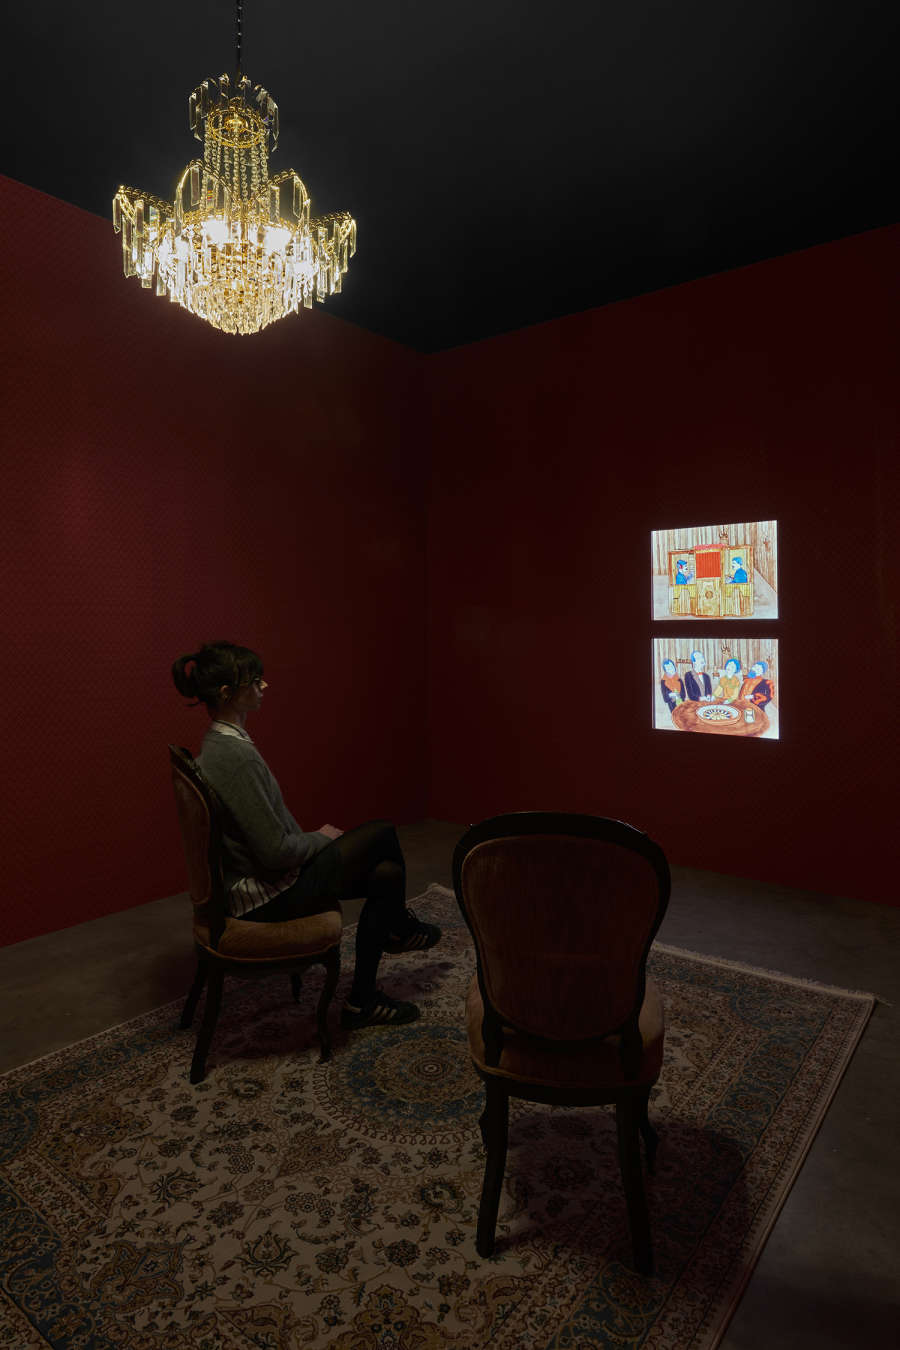 Installation view of a red room with a chandelier and a person sitting in a chair in front of two small projections on the wall in front of them.